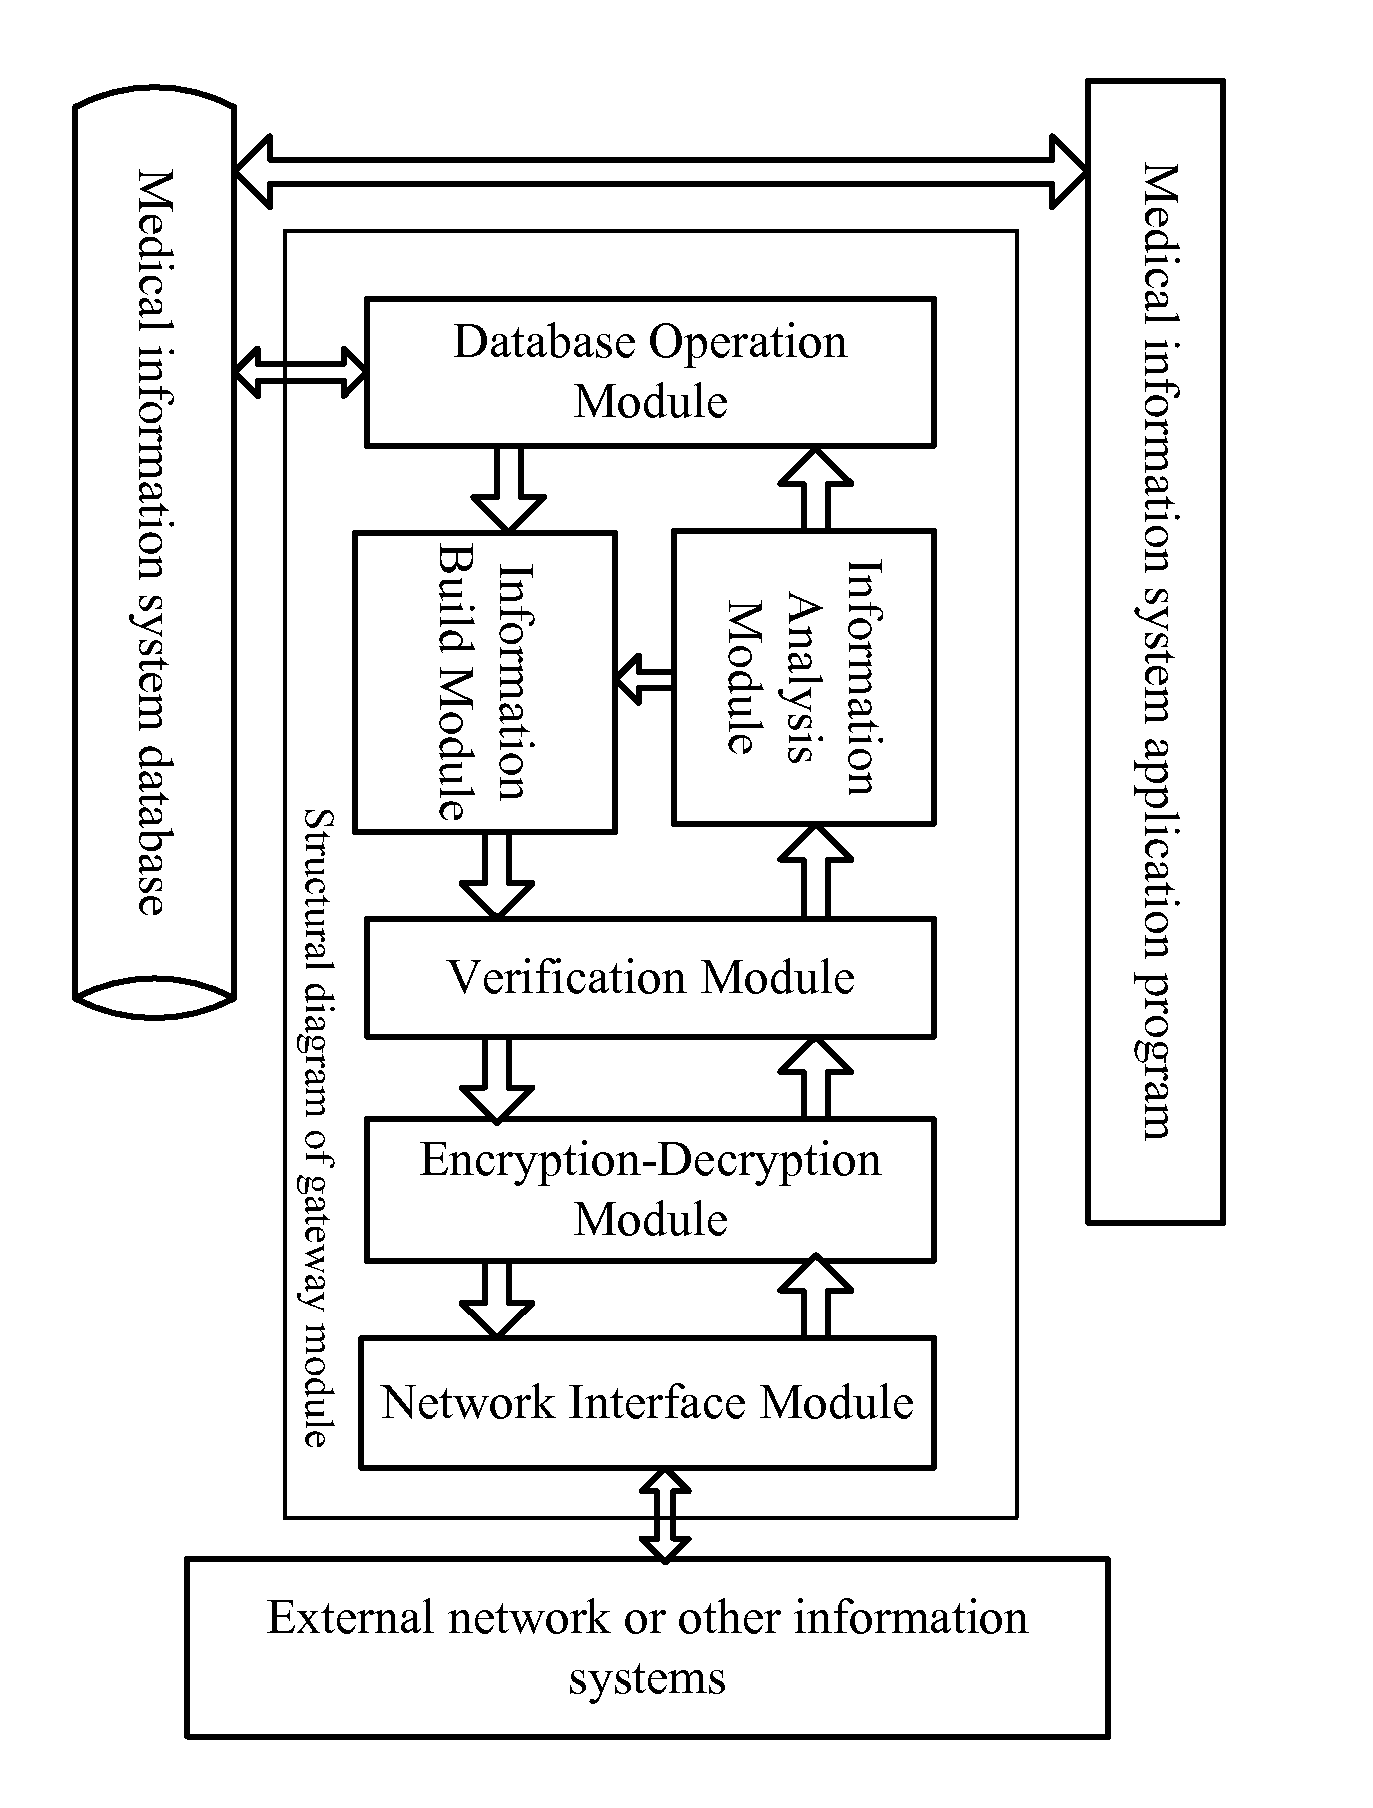 Method for unified communication between multiple medical information systems